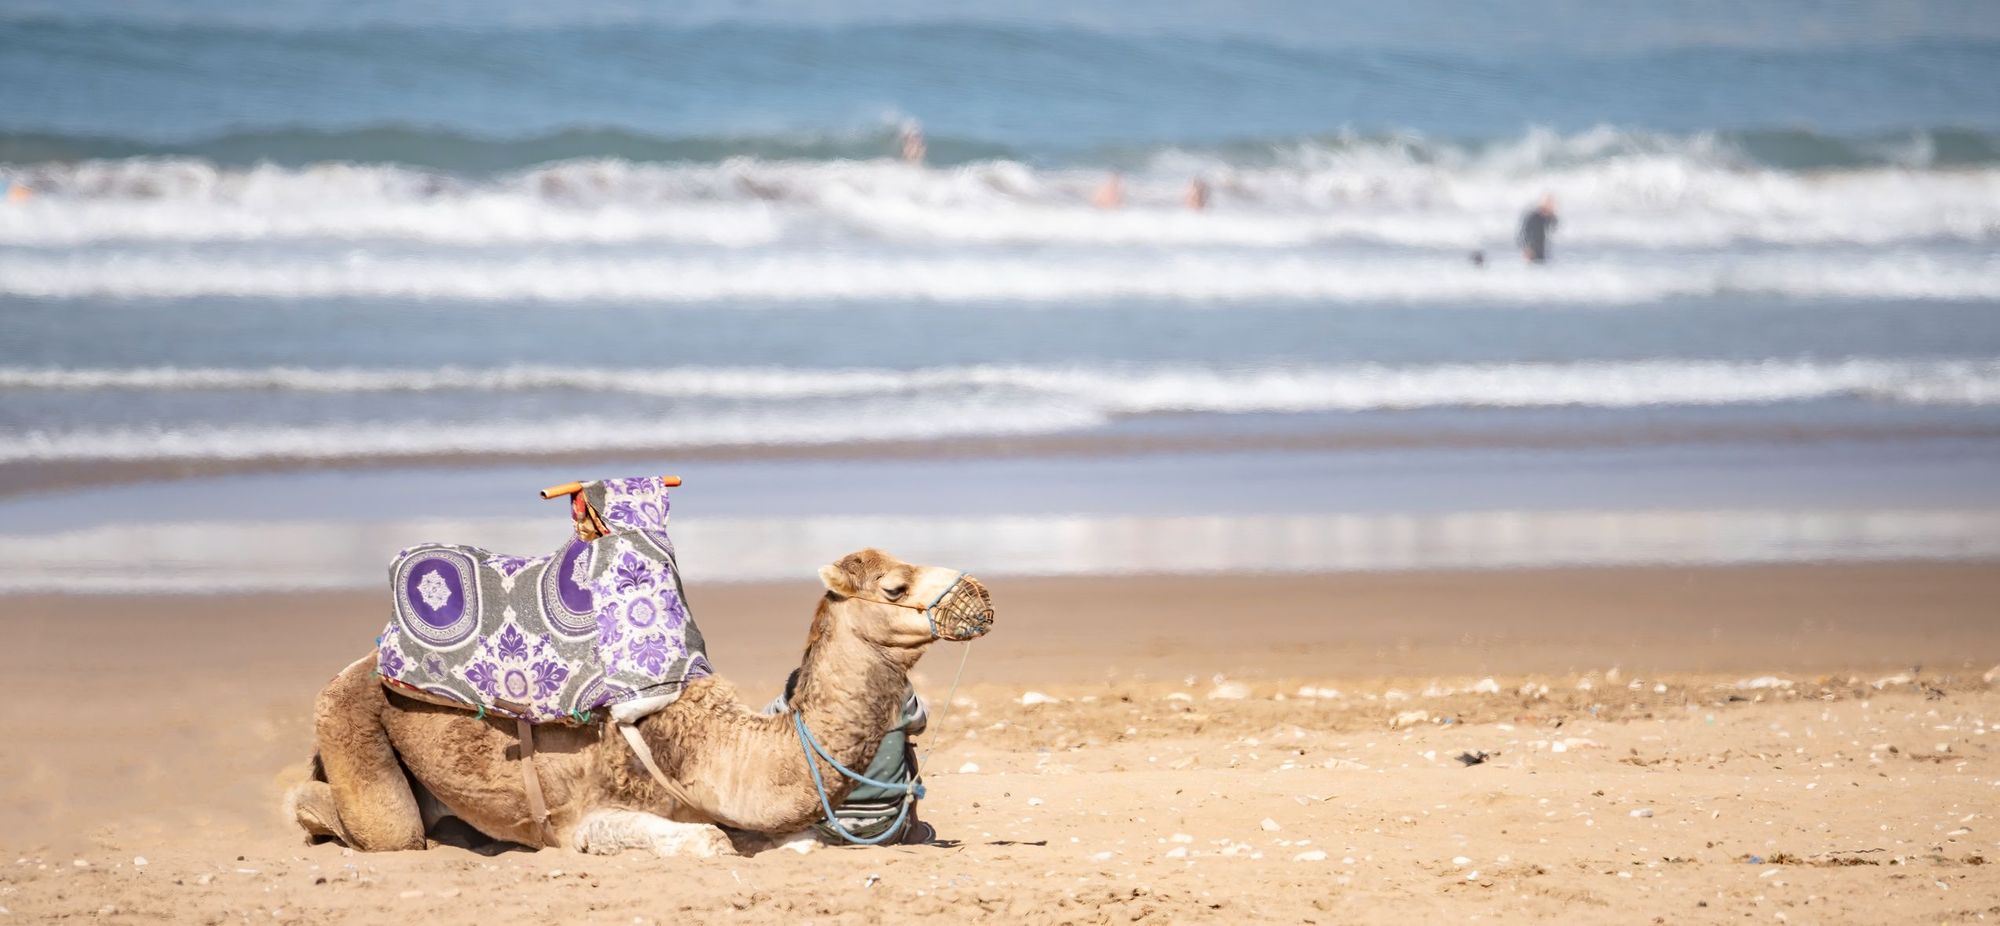 A camel kneels in the sand at Taghazout, a beach in Morocco.